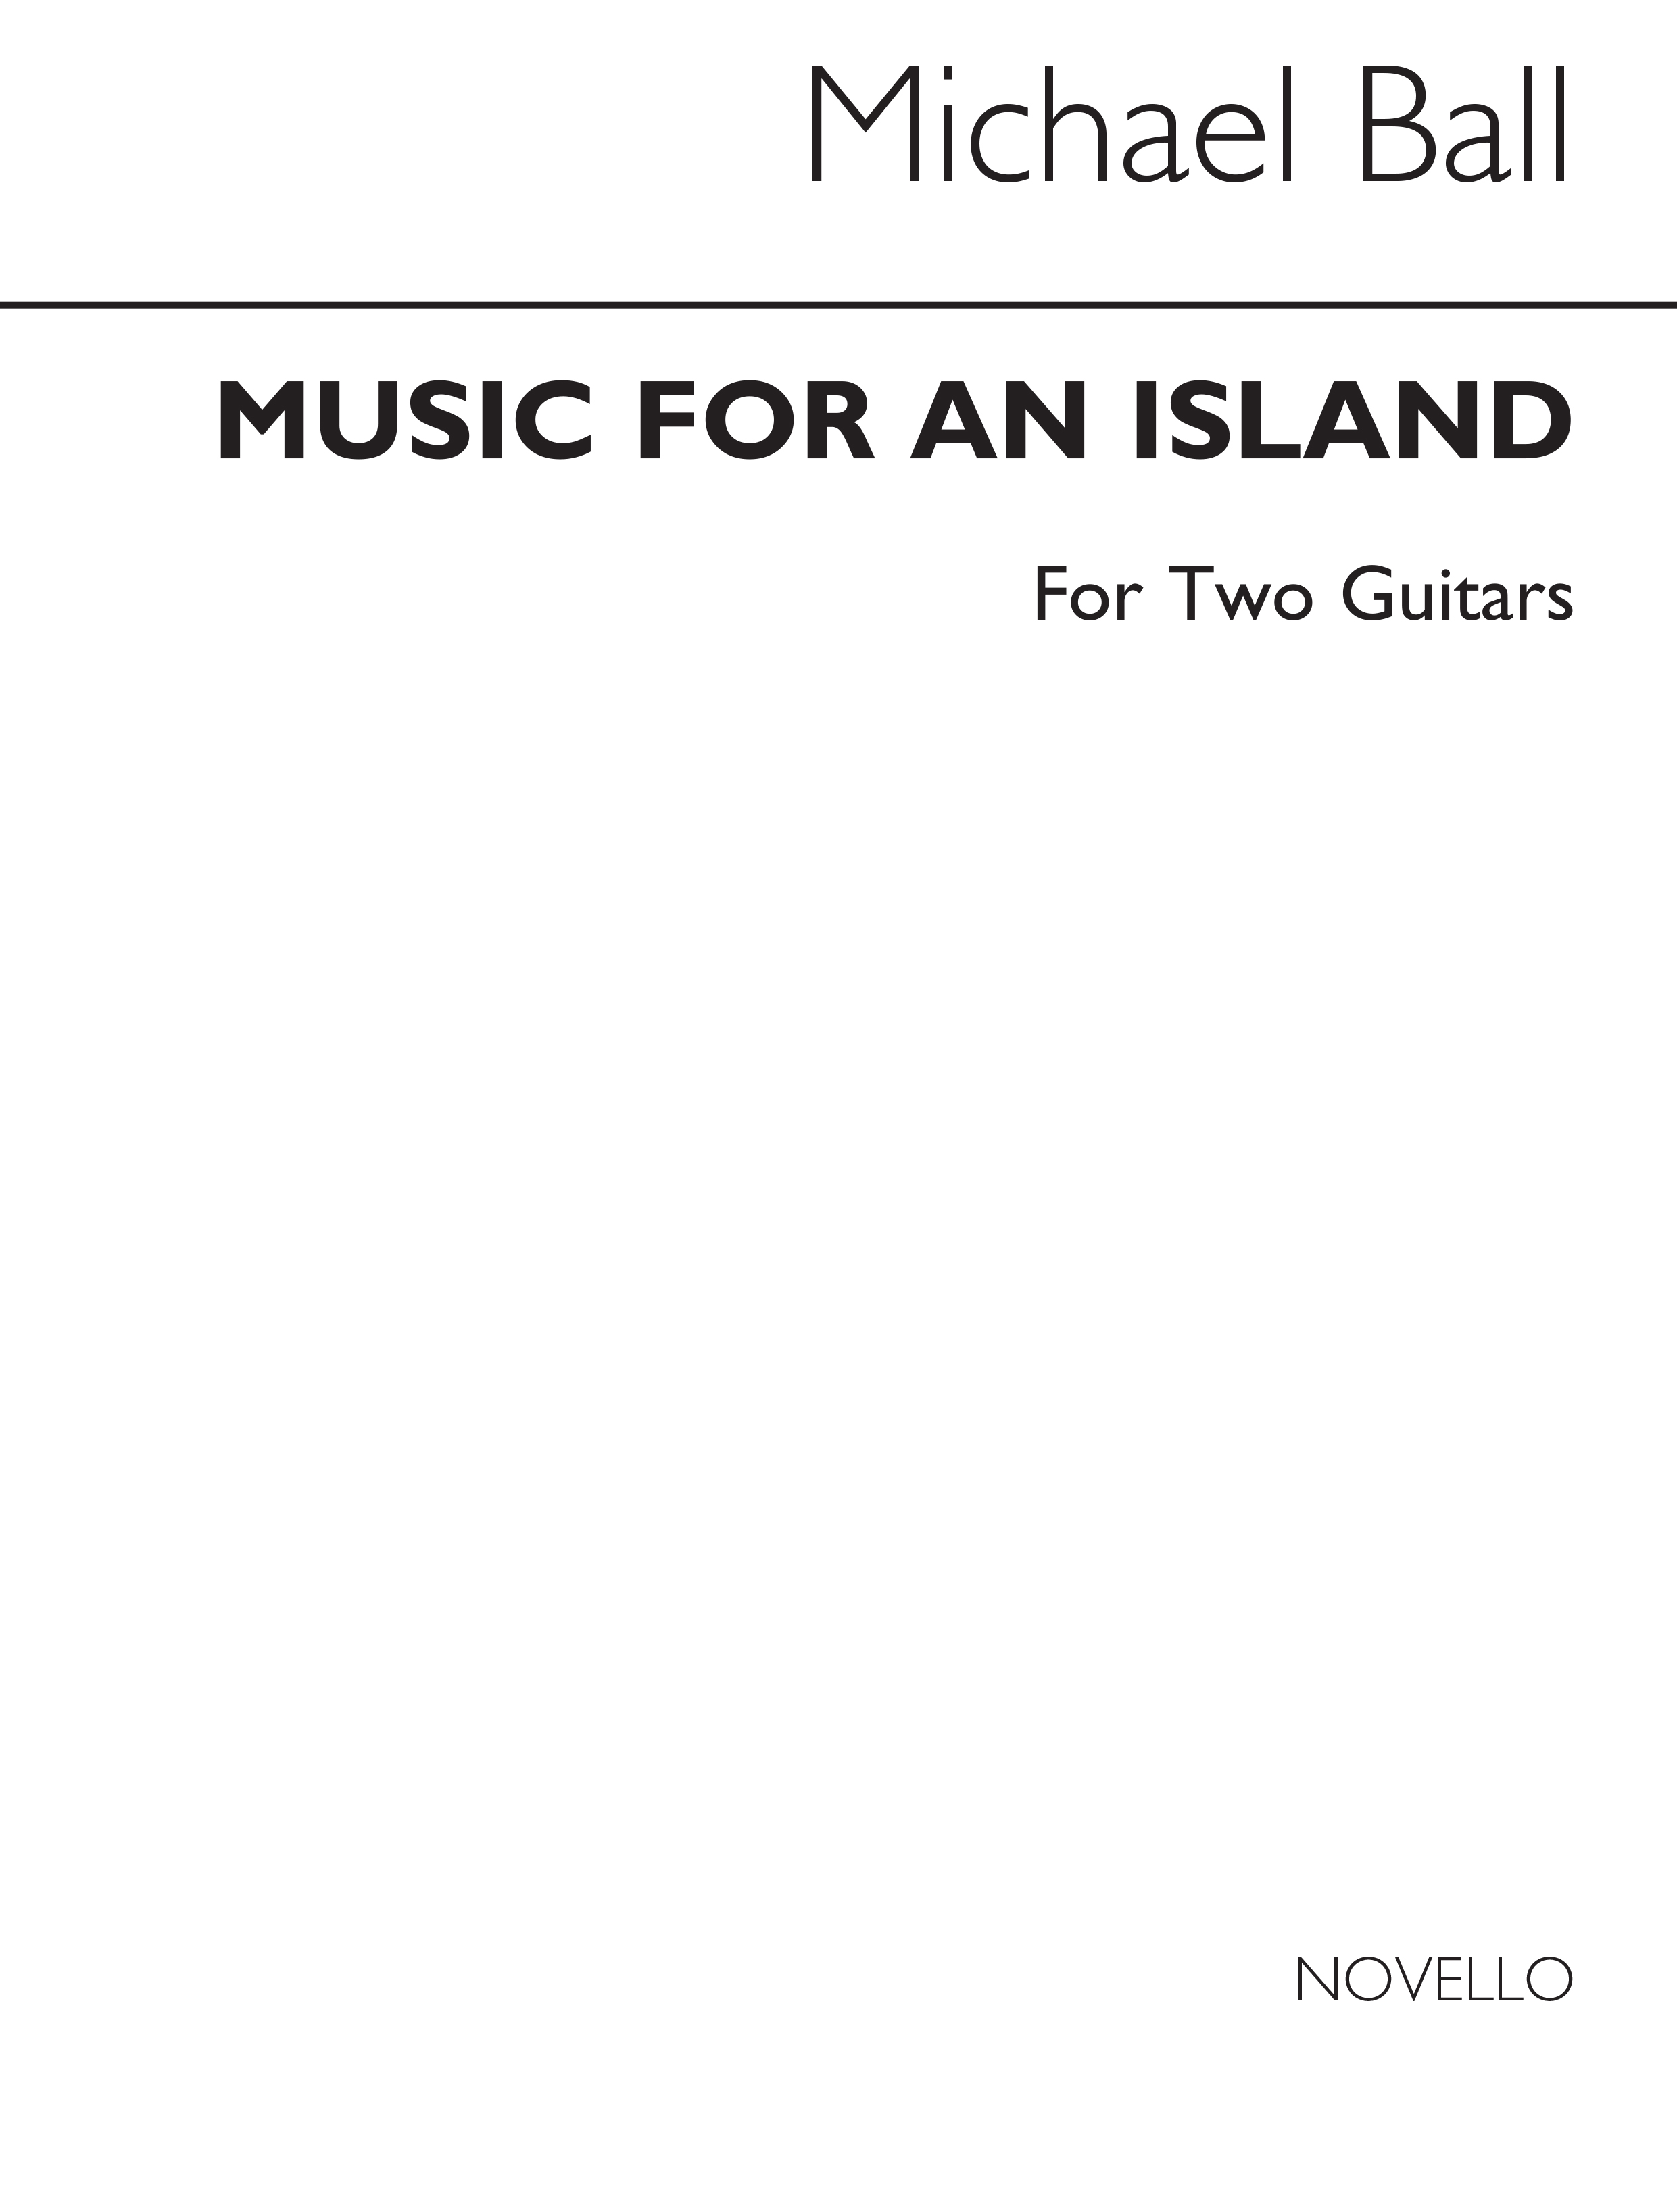 Ball: Music For An Island for Two Guitars